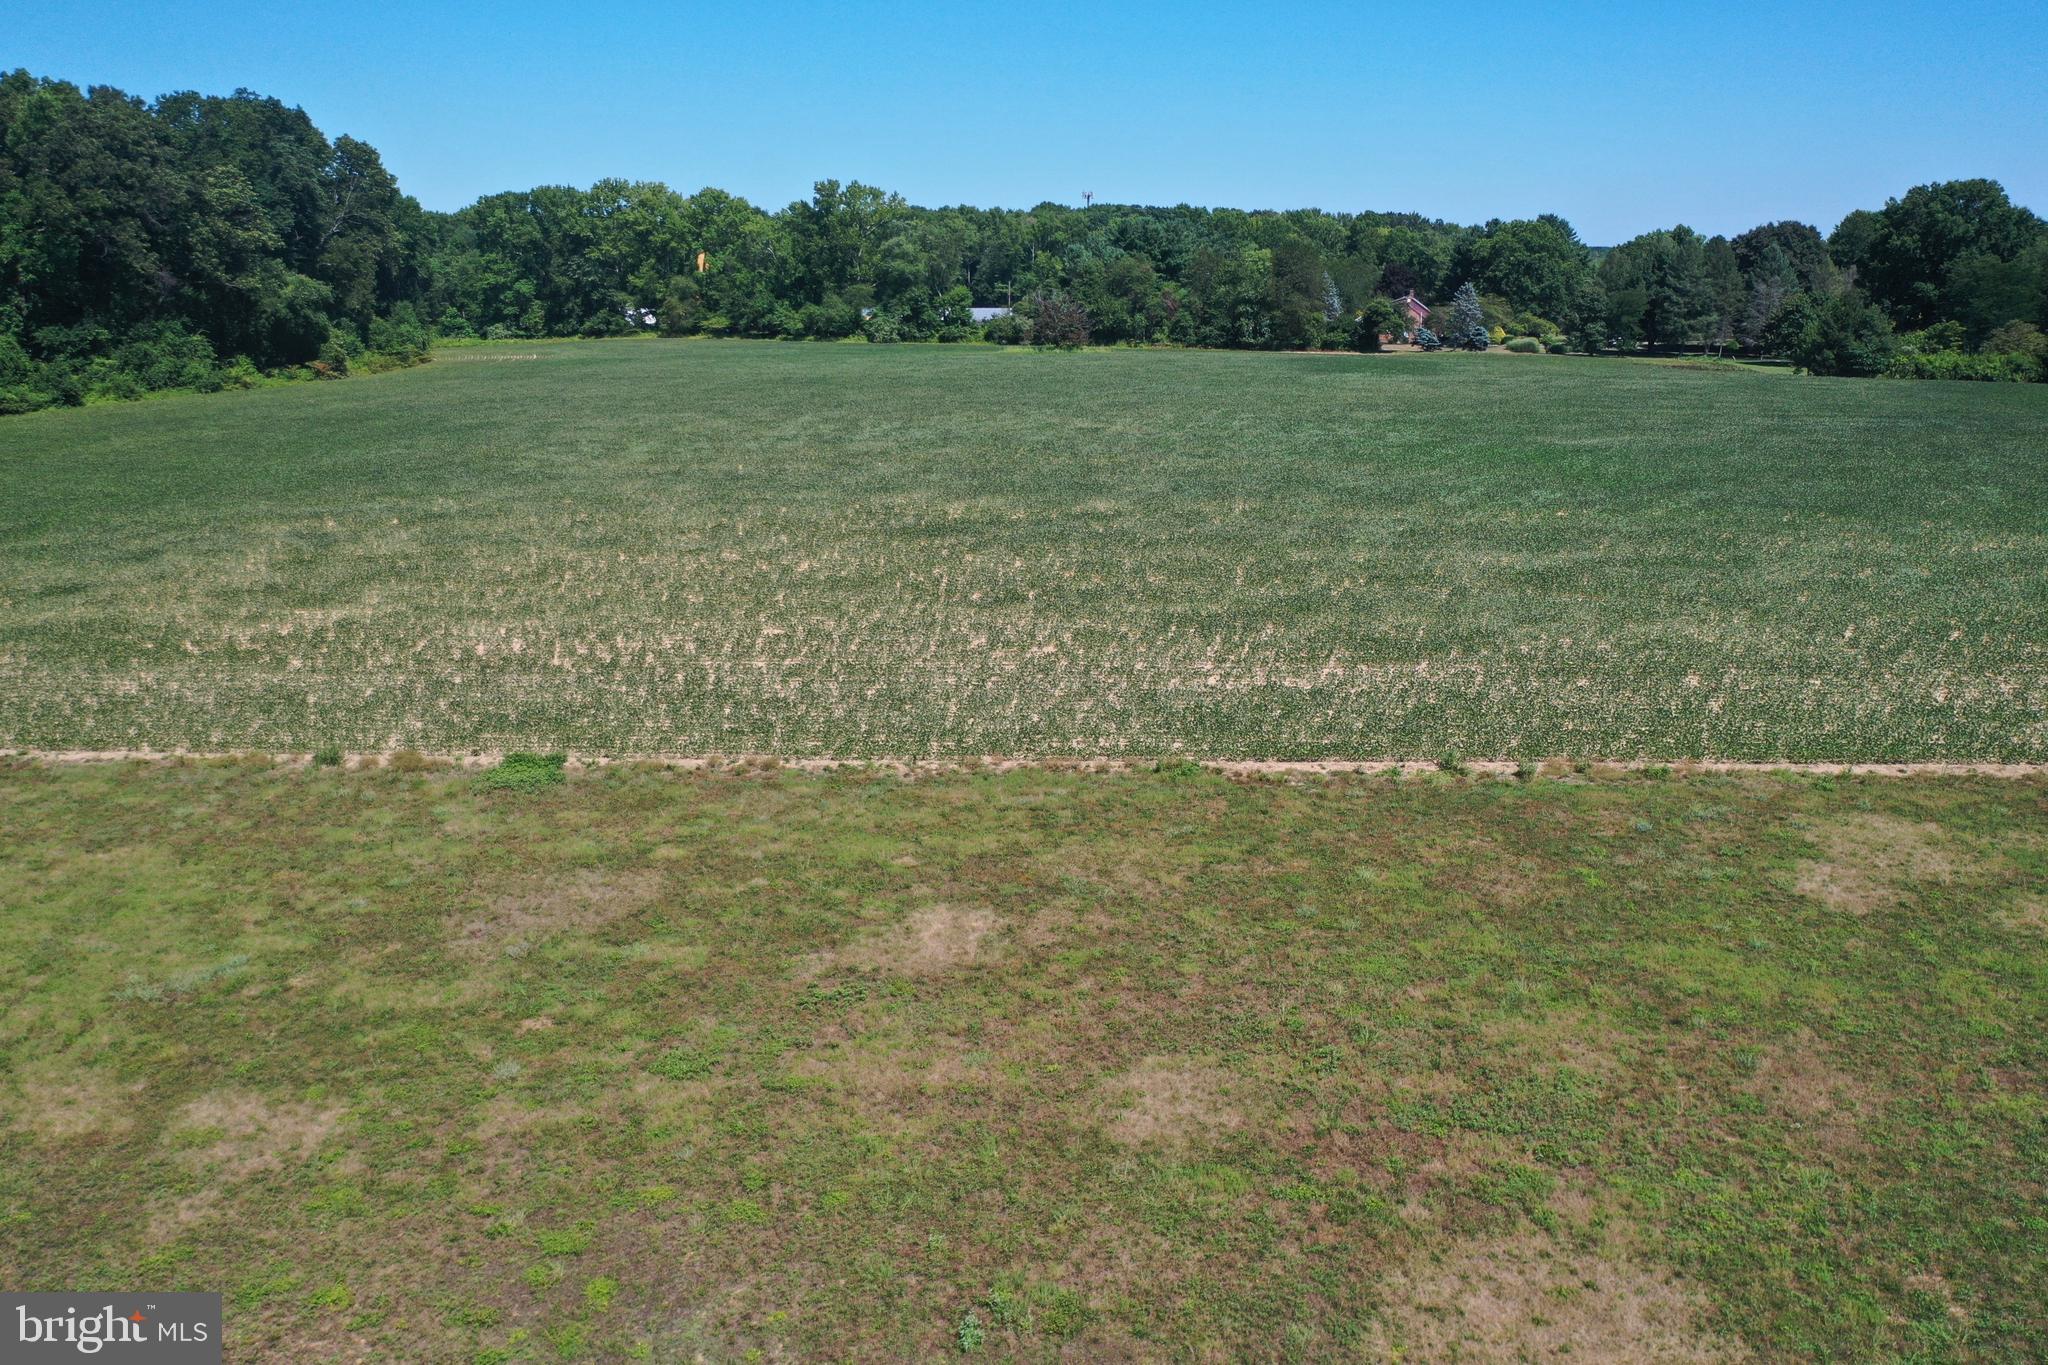 a view of a field with an trees in the background